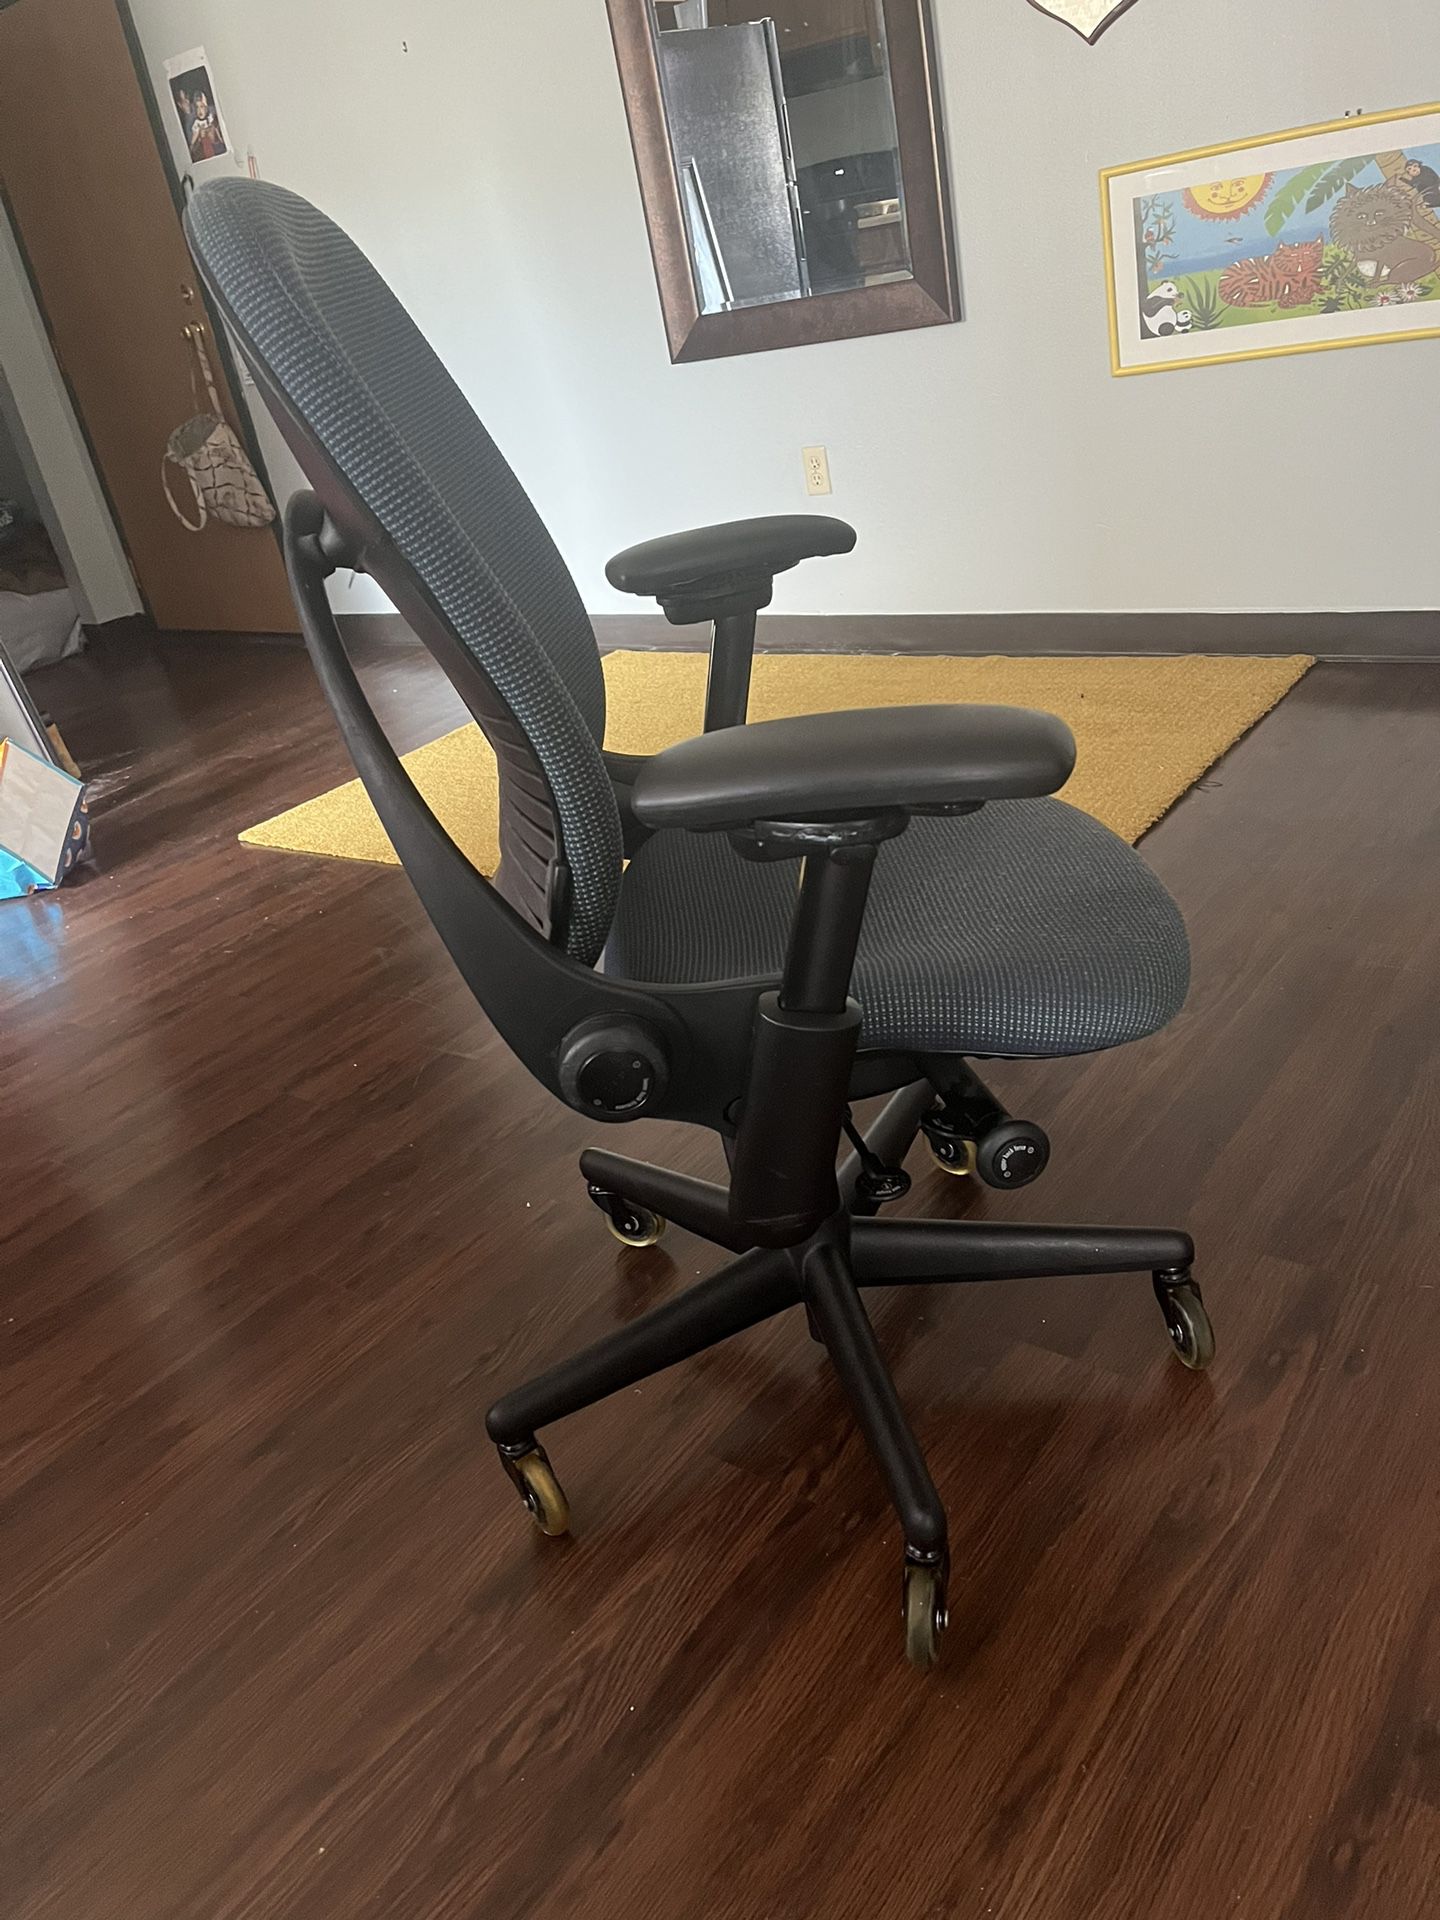 Steel case leap v1 (office/gaming chair)